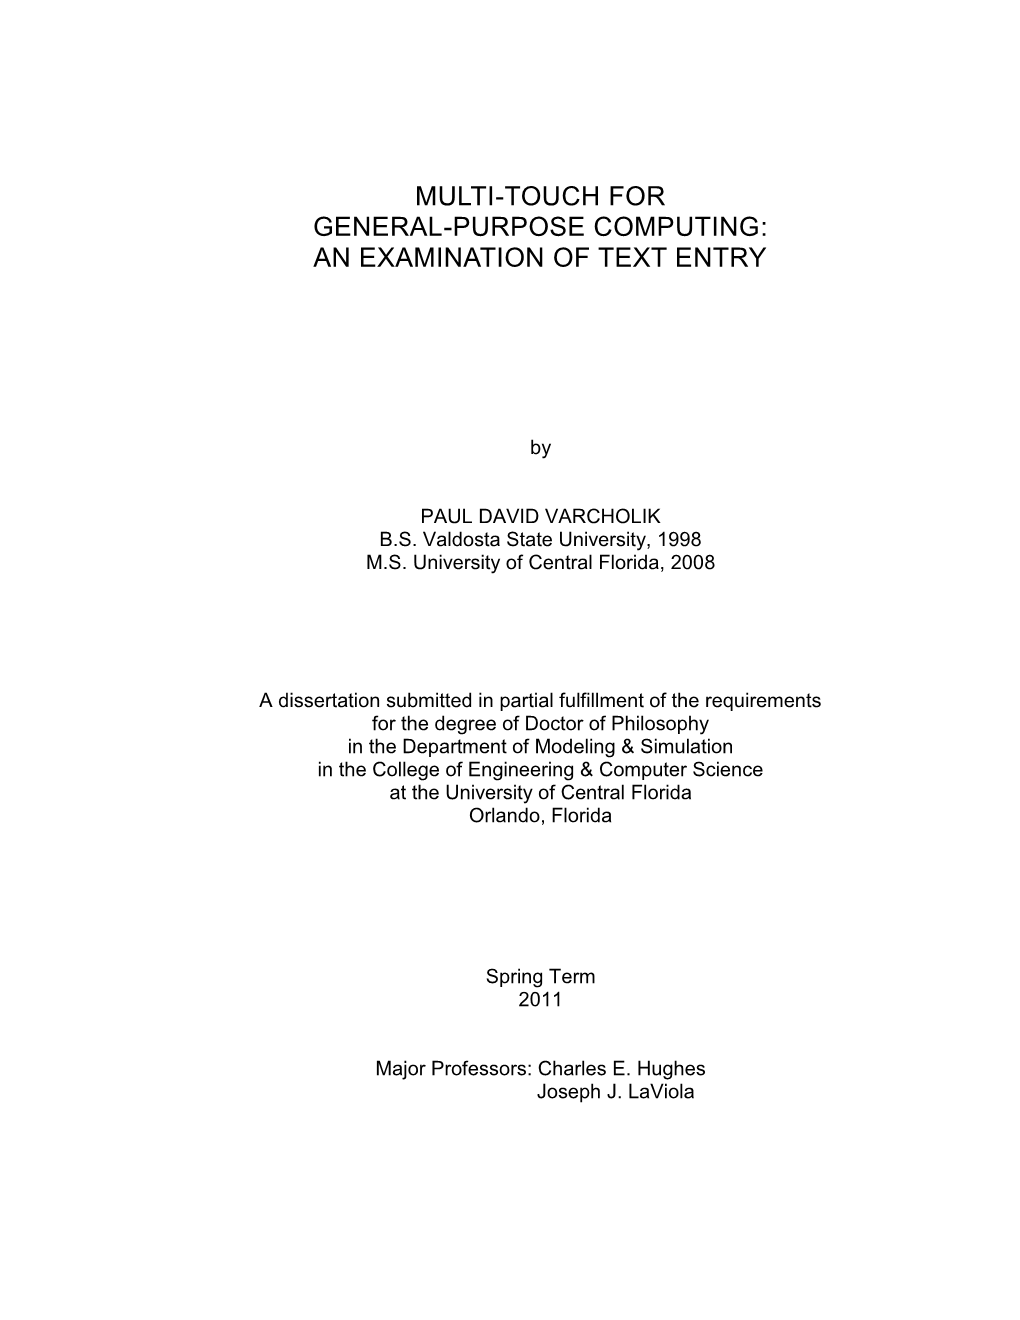 Multi-Touch for General-Purpose Computing: an Examination of Text Entry